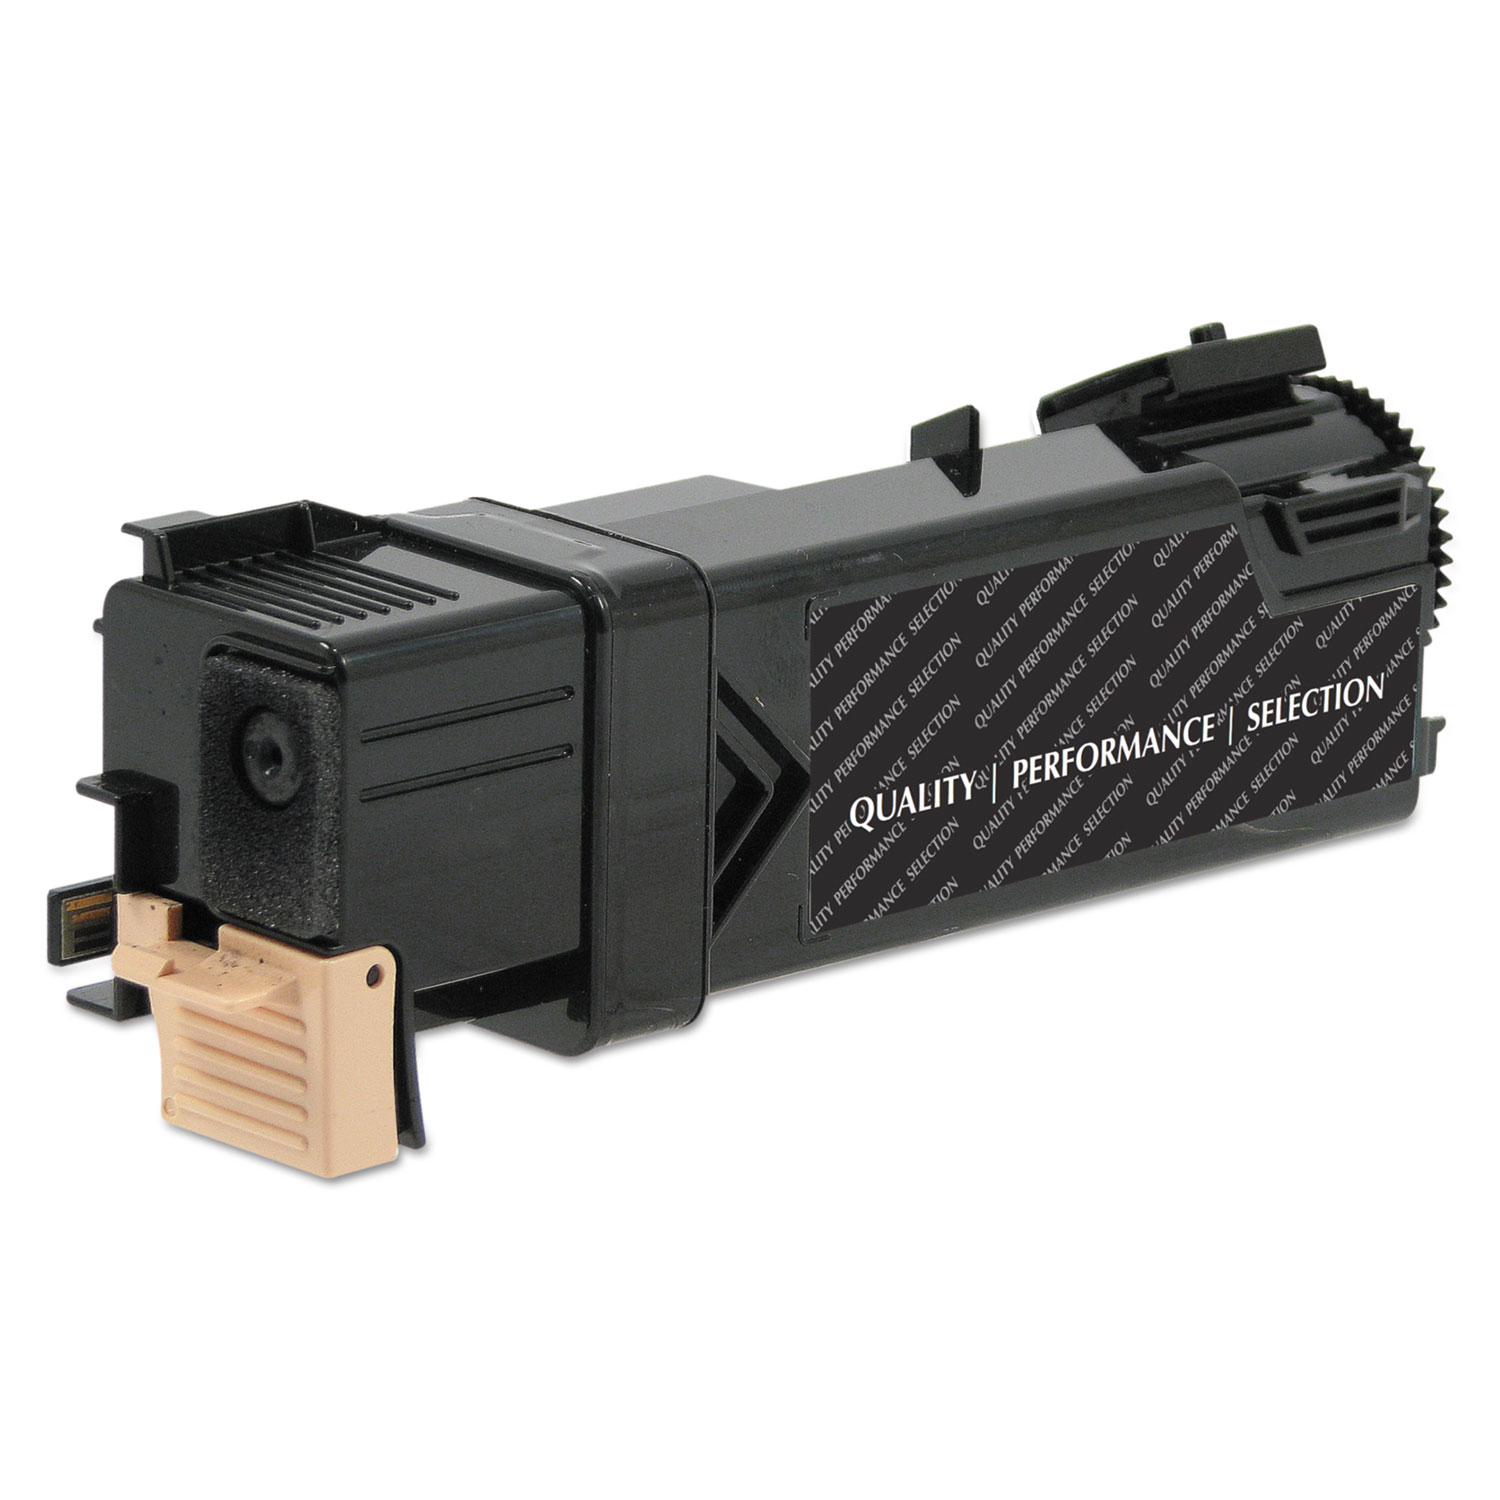 Remanufactured 331-0719 (2150) High-Yield Toner, 3000 Page-Yield, Black